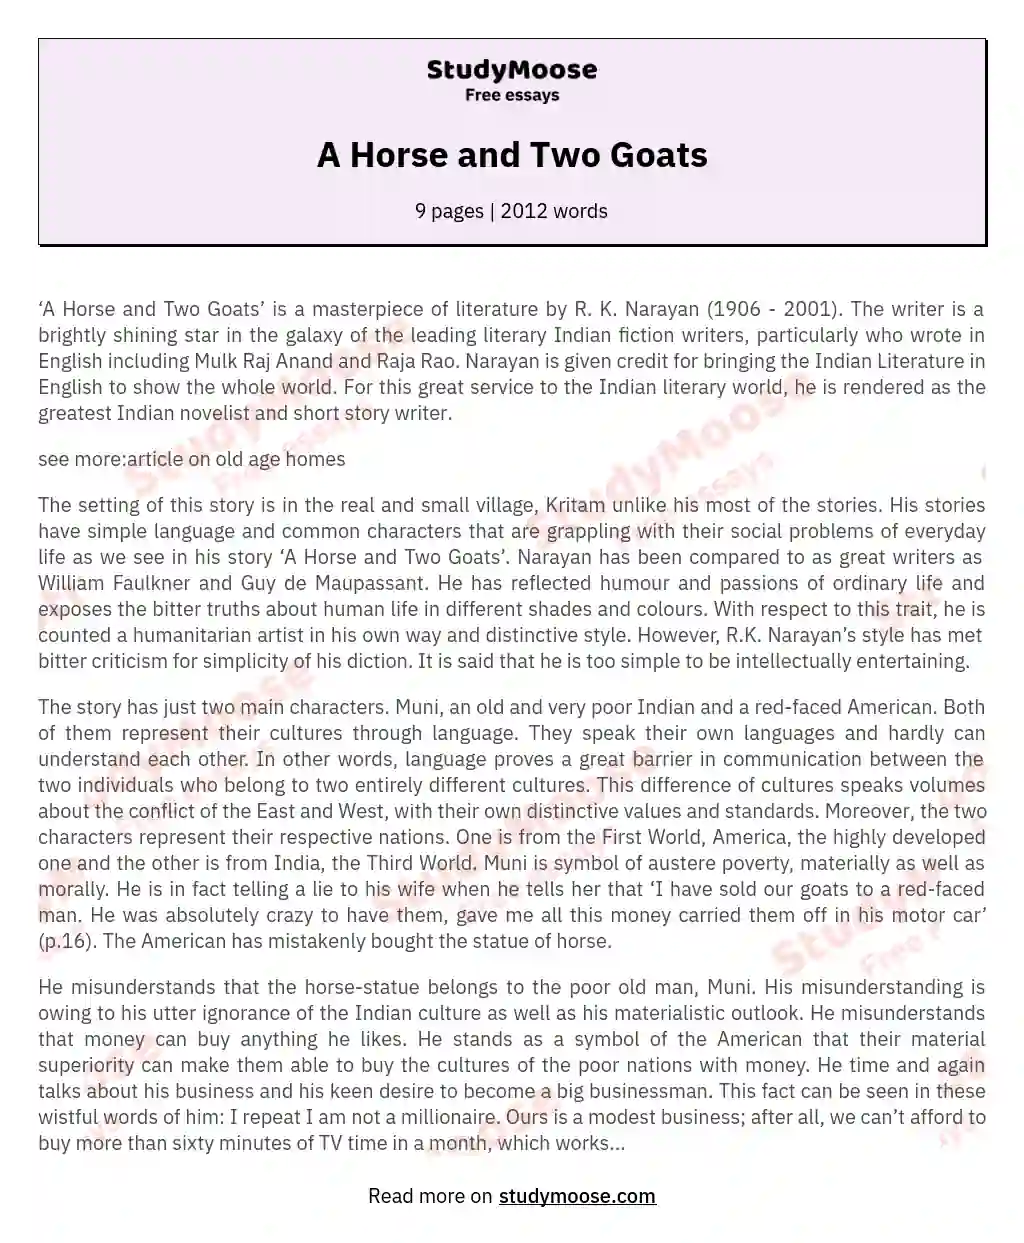 A Horse and Two Goats essay